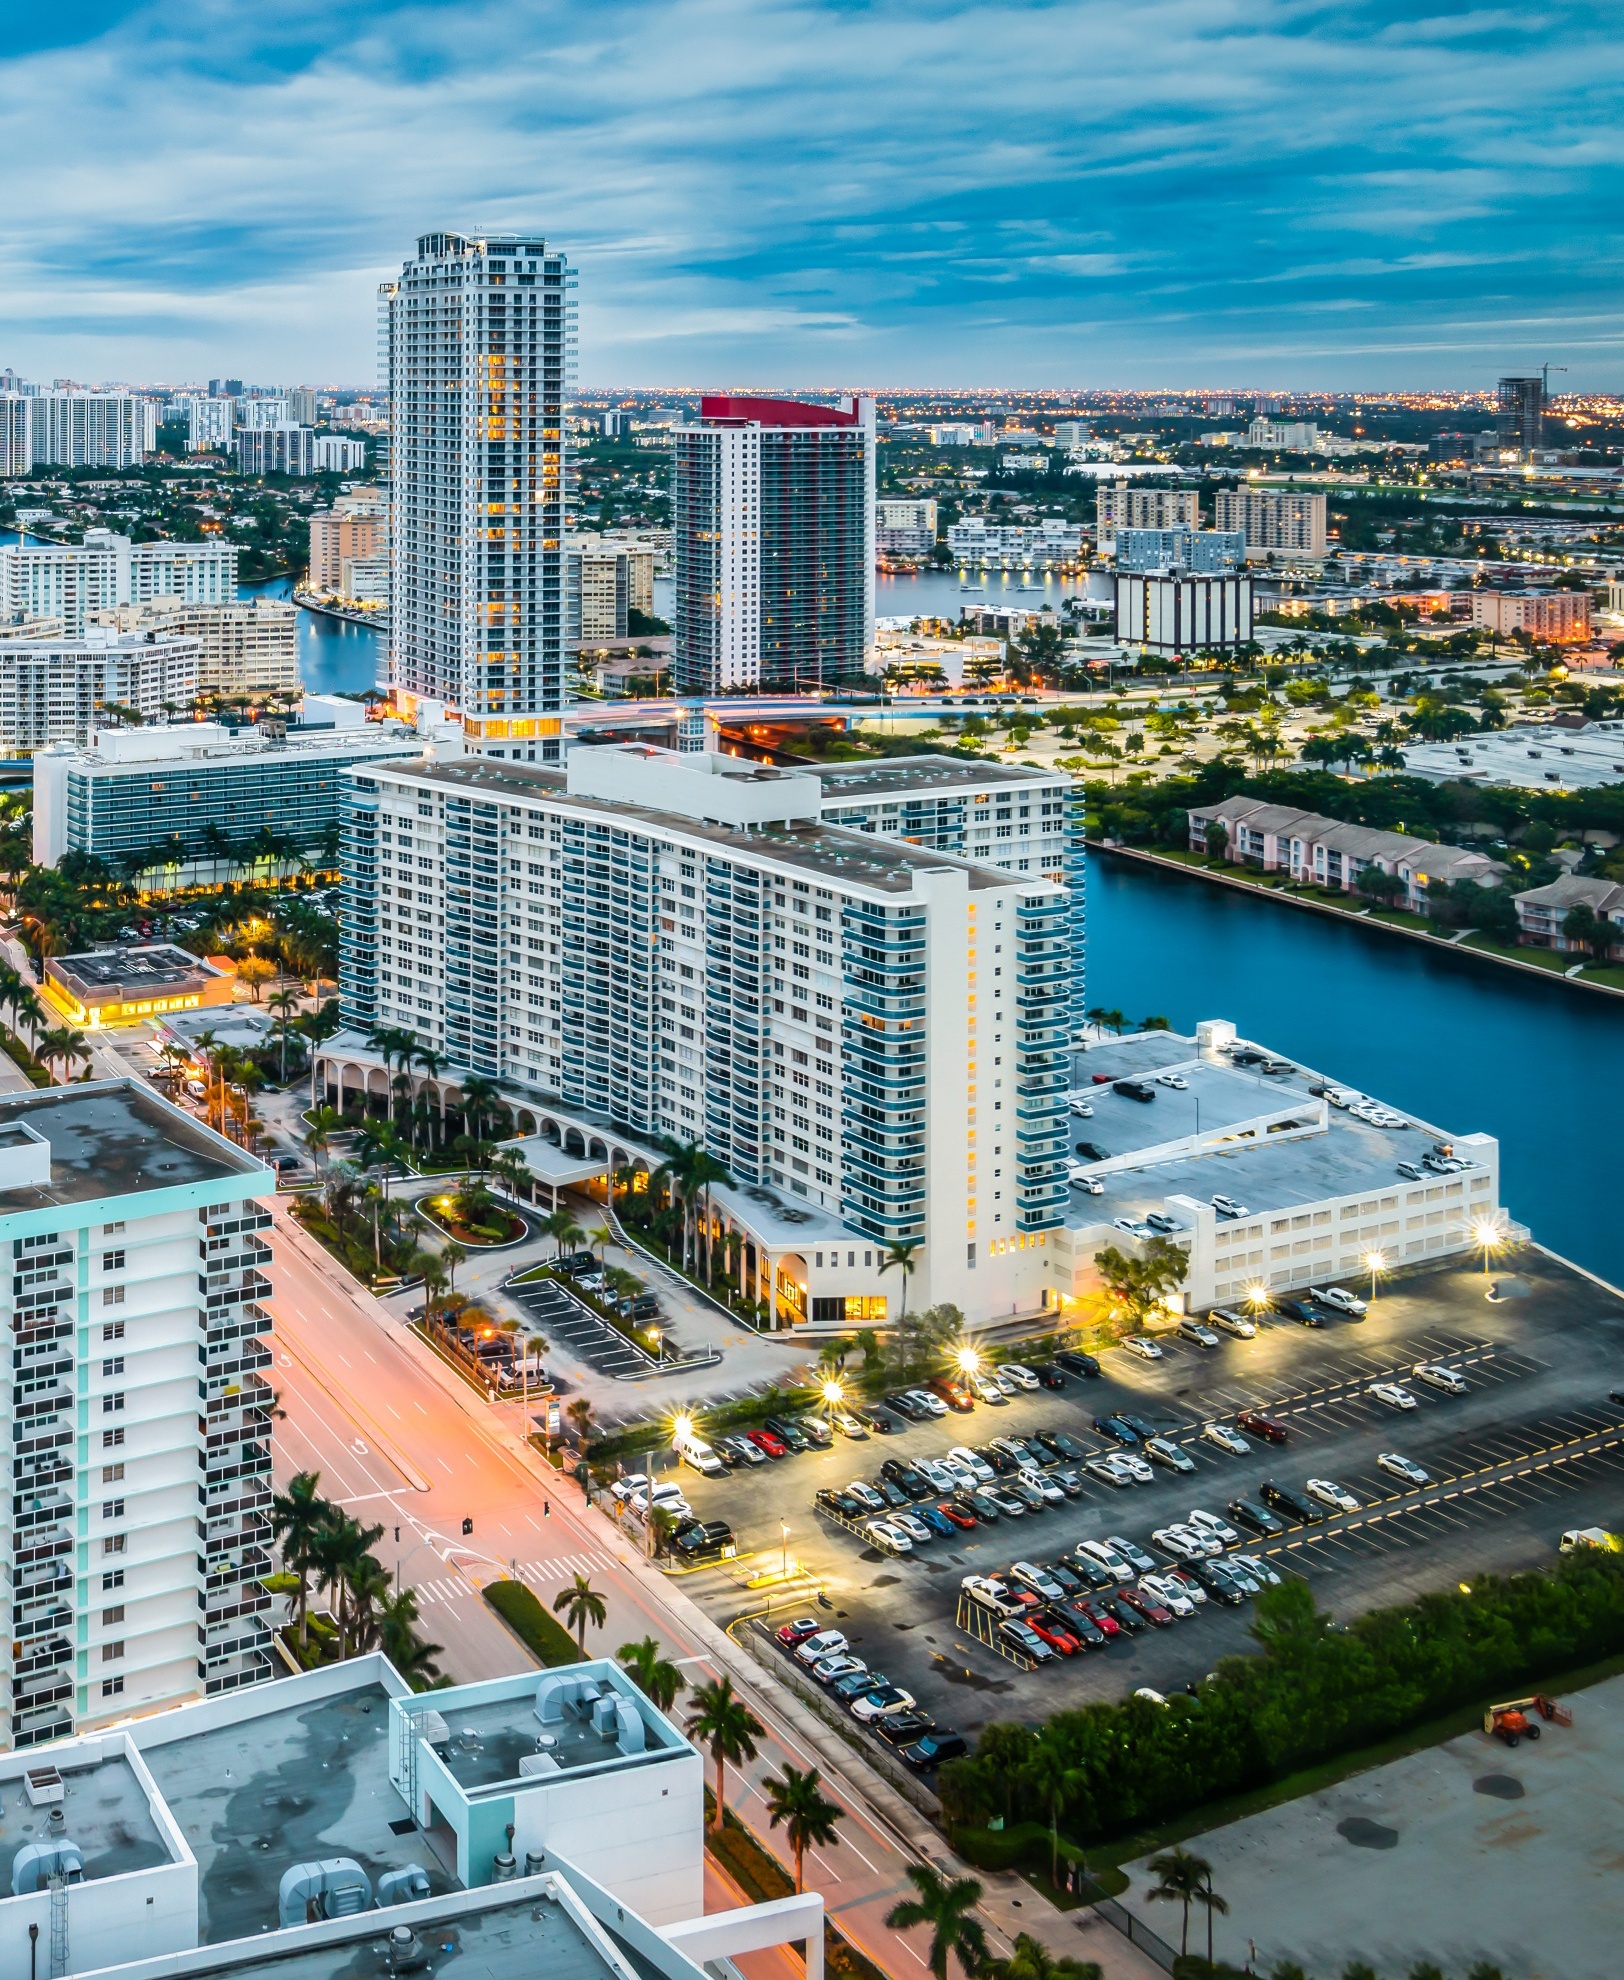 Cityscape of Hollywood, Florida | © NANCY PAUWELS / iStock / Getty Images Plus